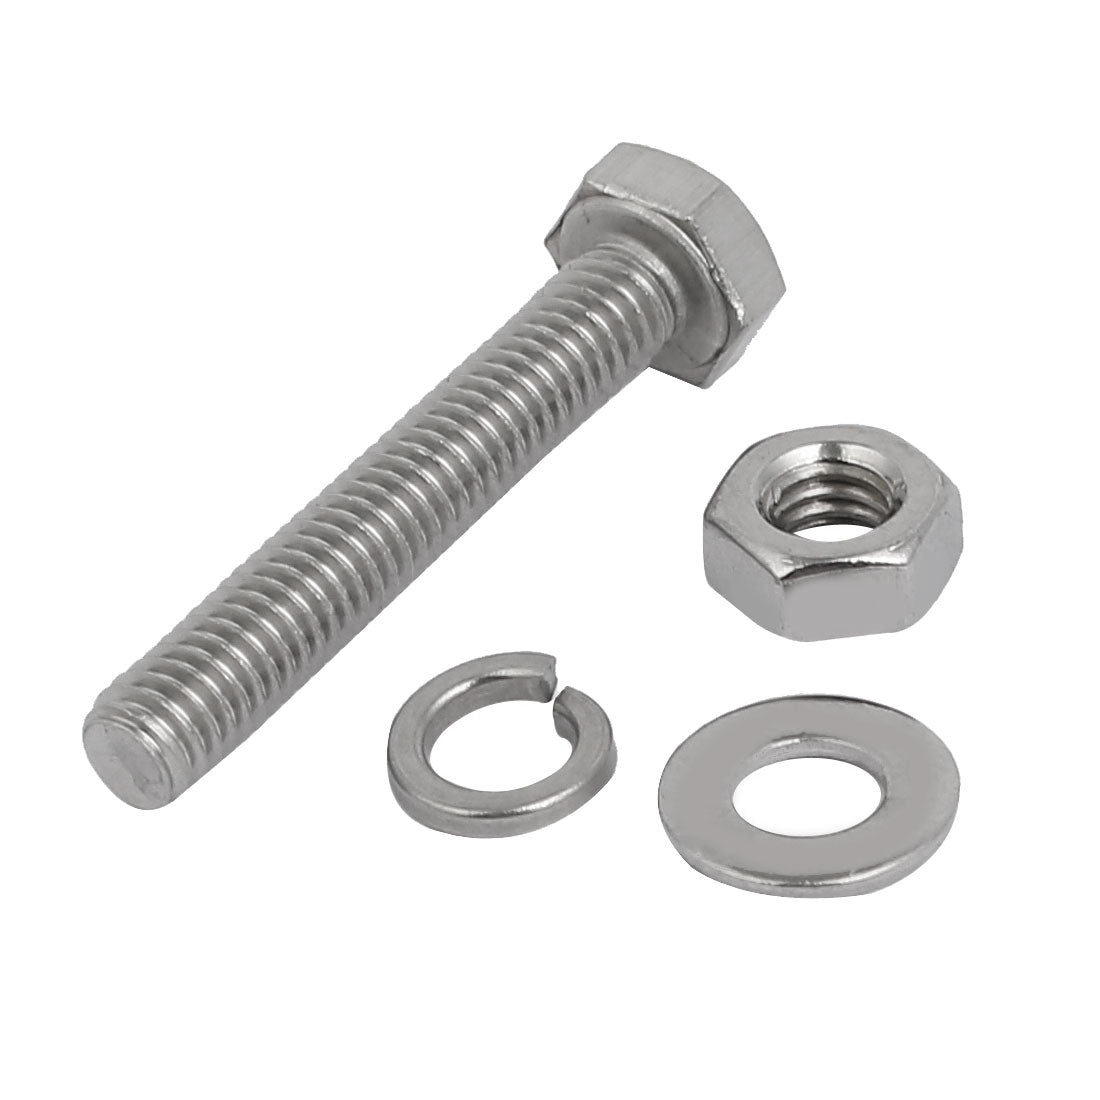 uxcell Uxcell 10pcs 304 Stainless Steel M4x25mm Hex Bolts w Nuts and Washers Assortment Kit